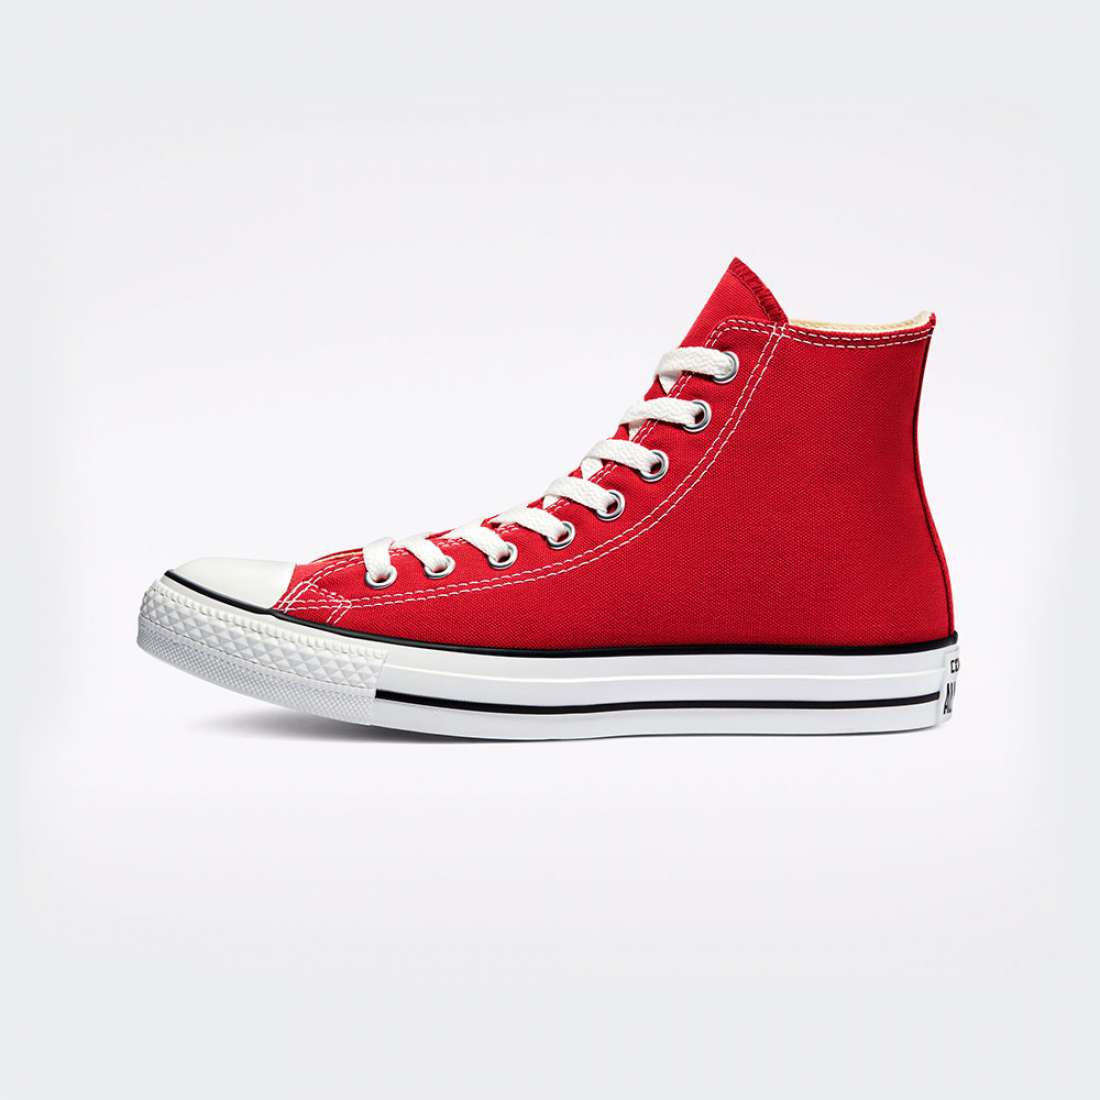 CONVERSE CHUCK TAYLOR ALL STAR HIGH TOP RED